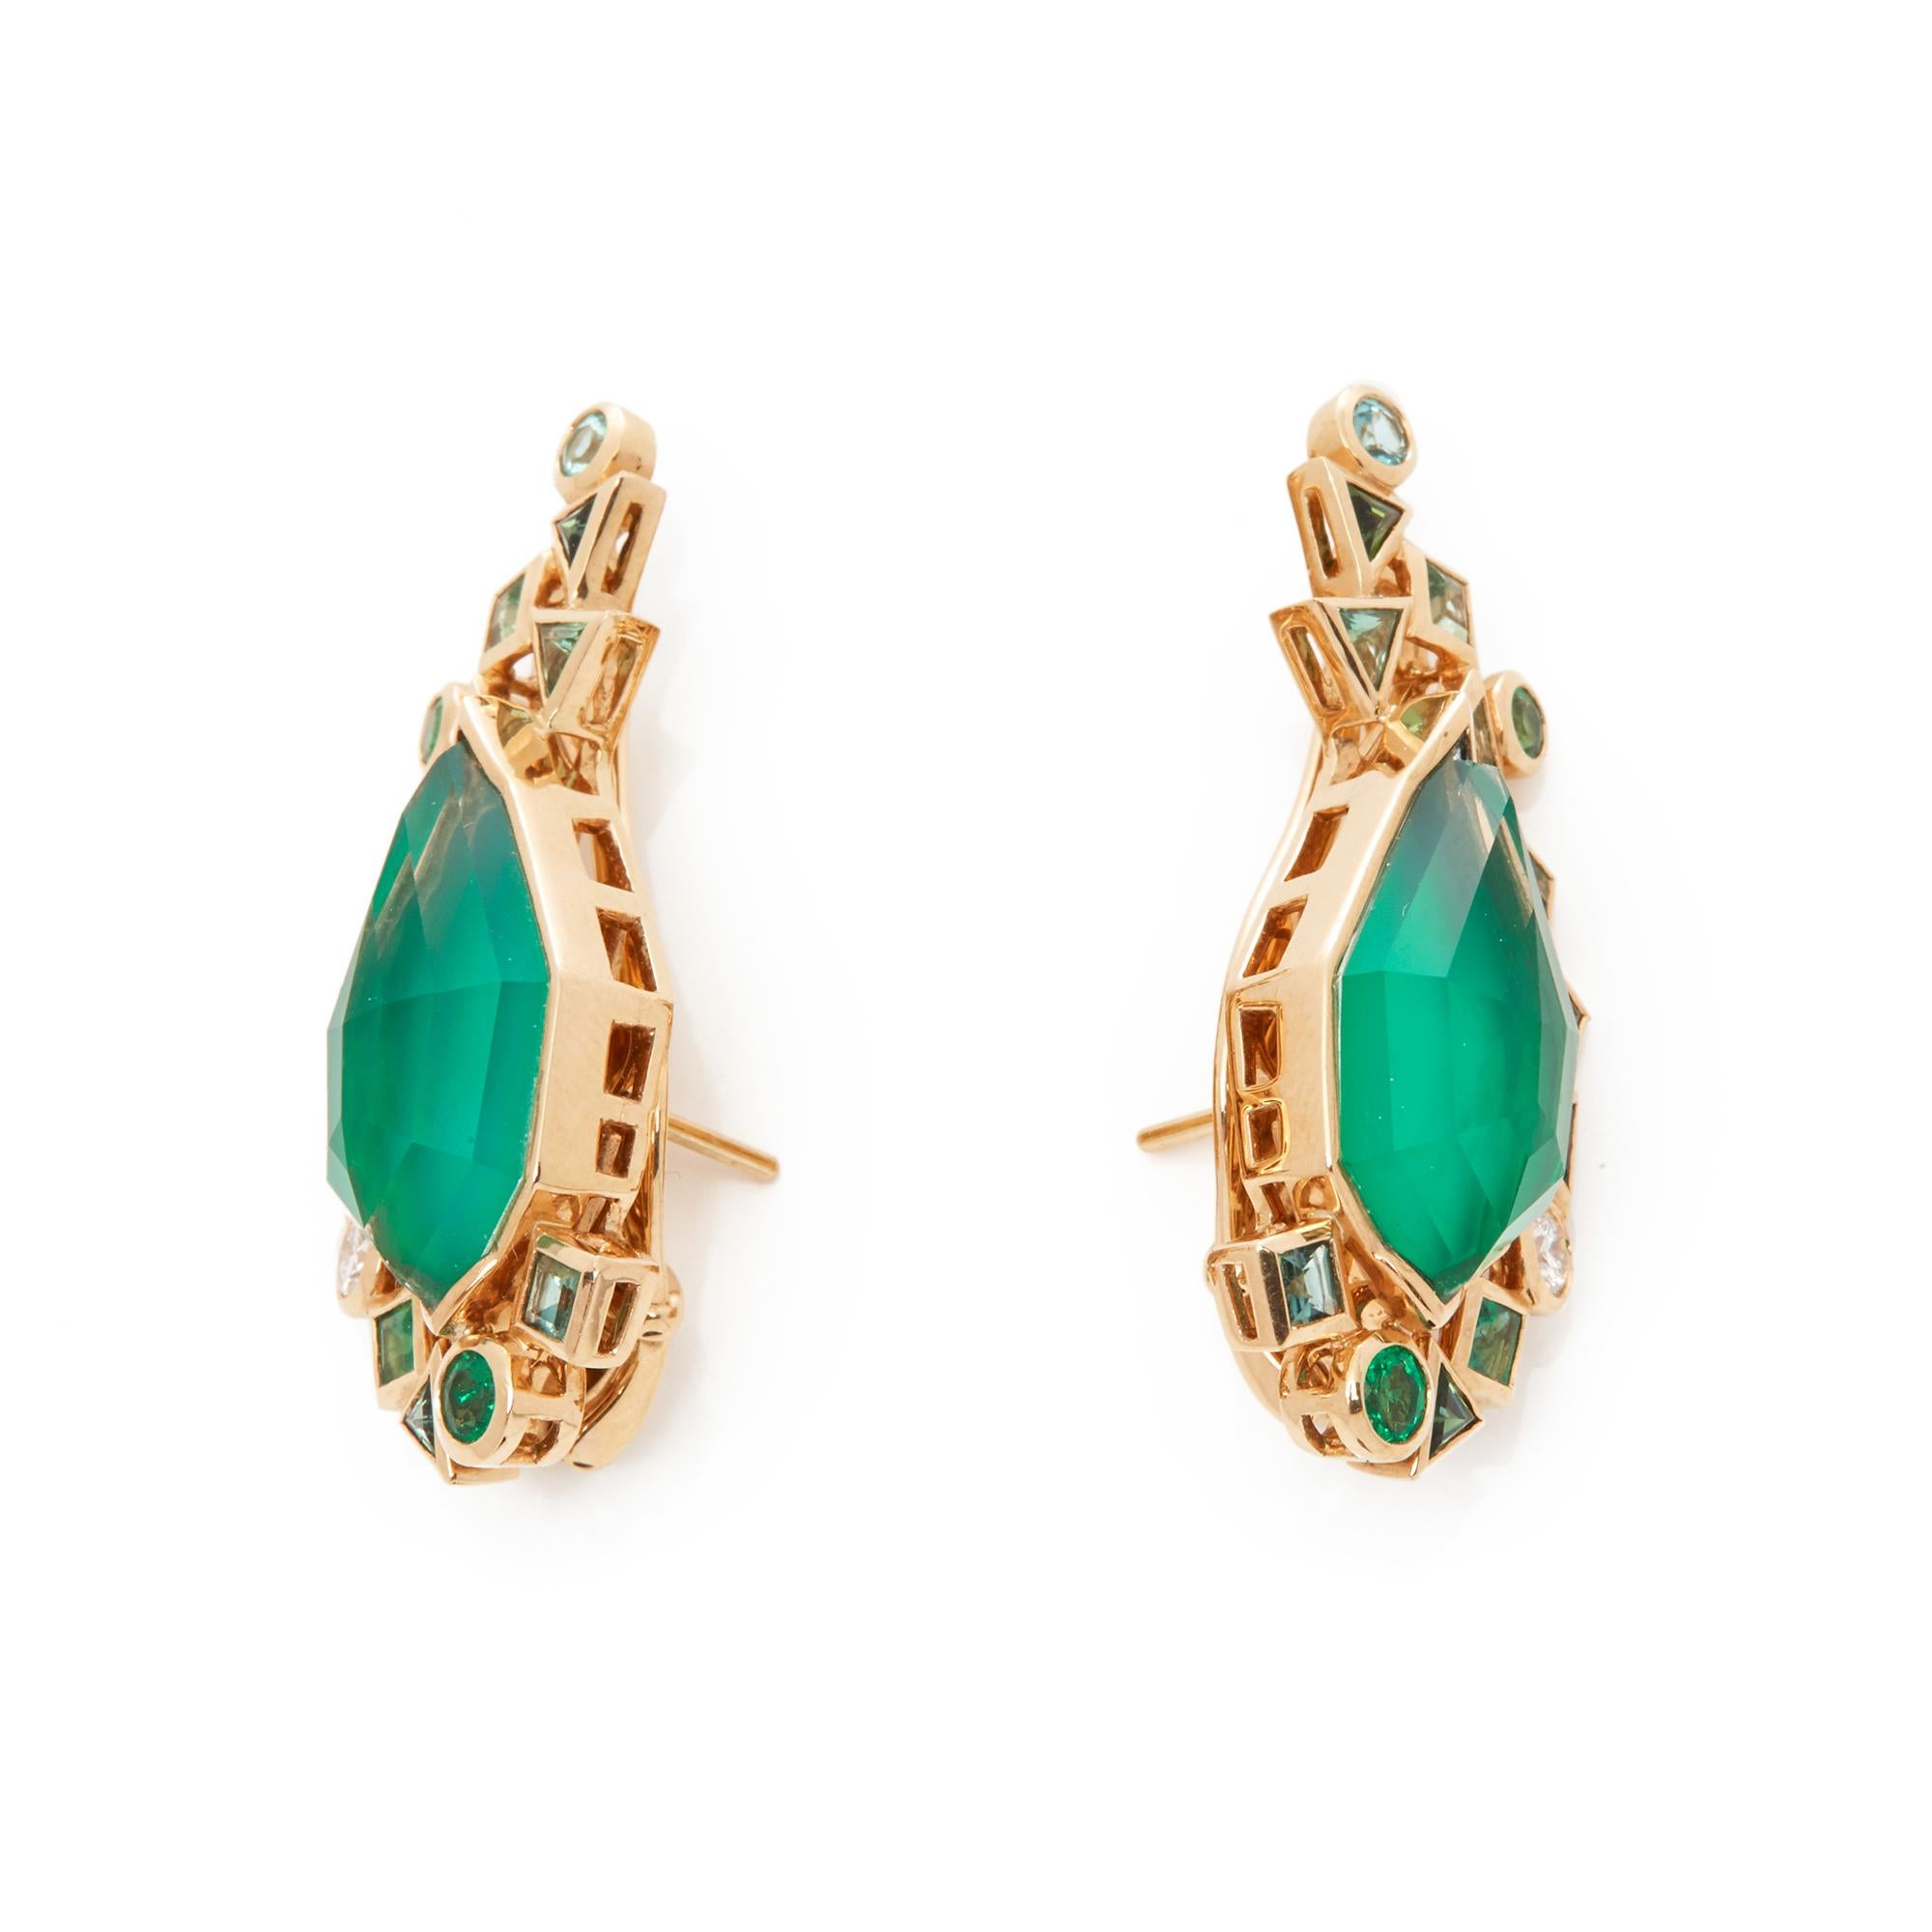 These Earrings by Stephen Webster are from his Crystal Haze Gold Struck Collection and features Two Green Agate set sections Surrounded with mixed cut Green Tourmaline and Round Brilliant Cut Diamonds. Set in 18k Yellow Gold. 